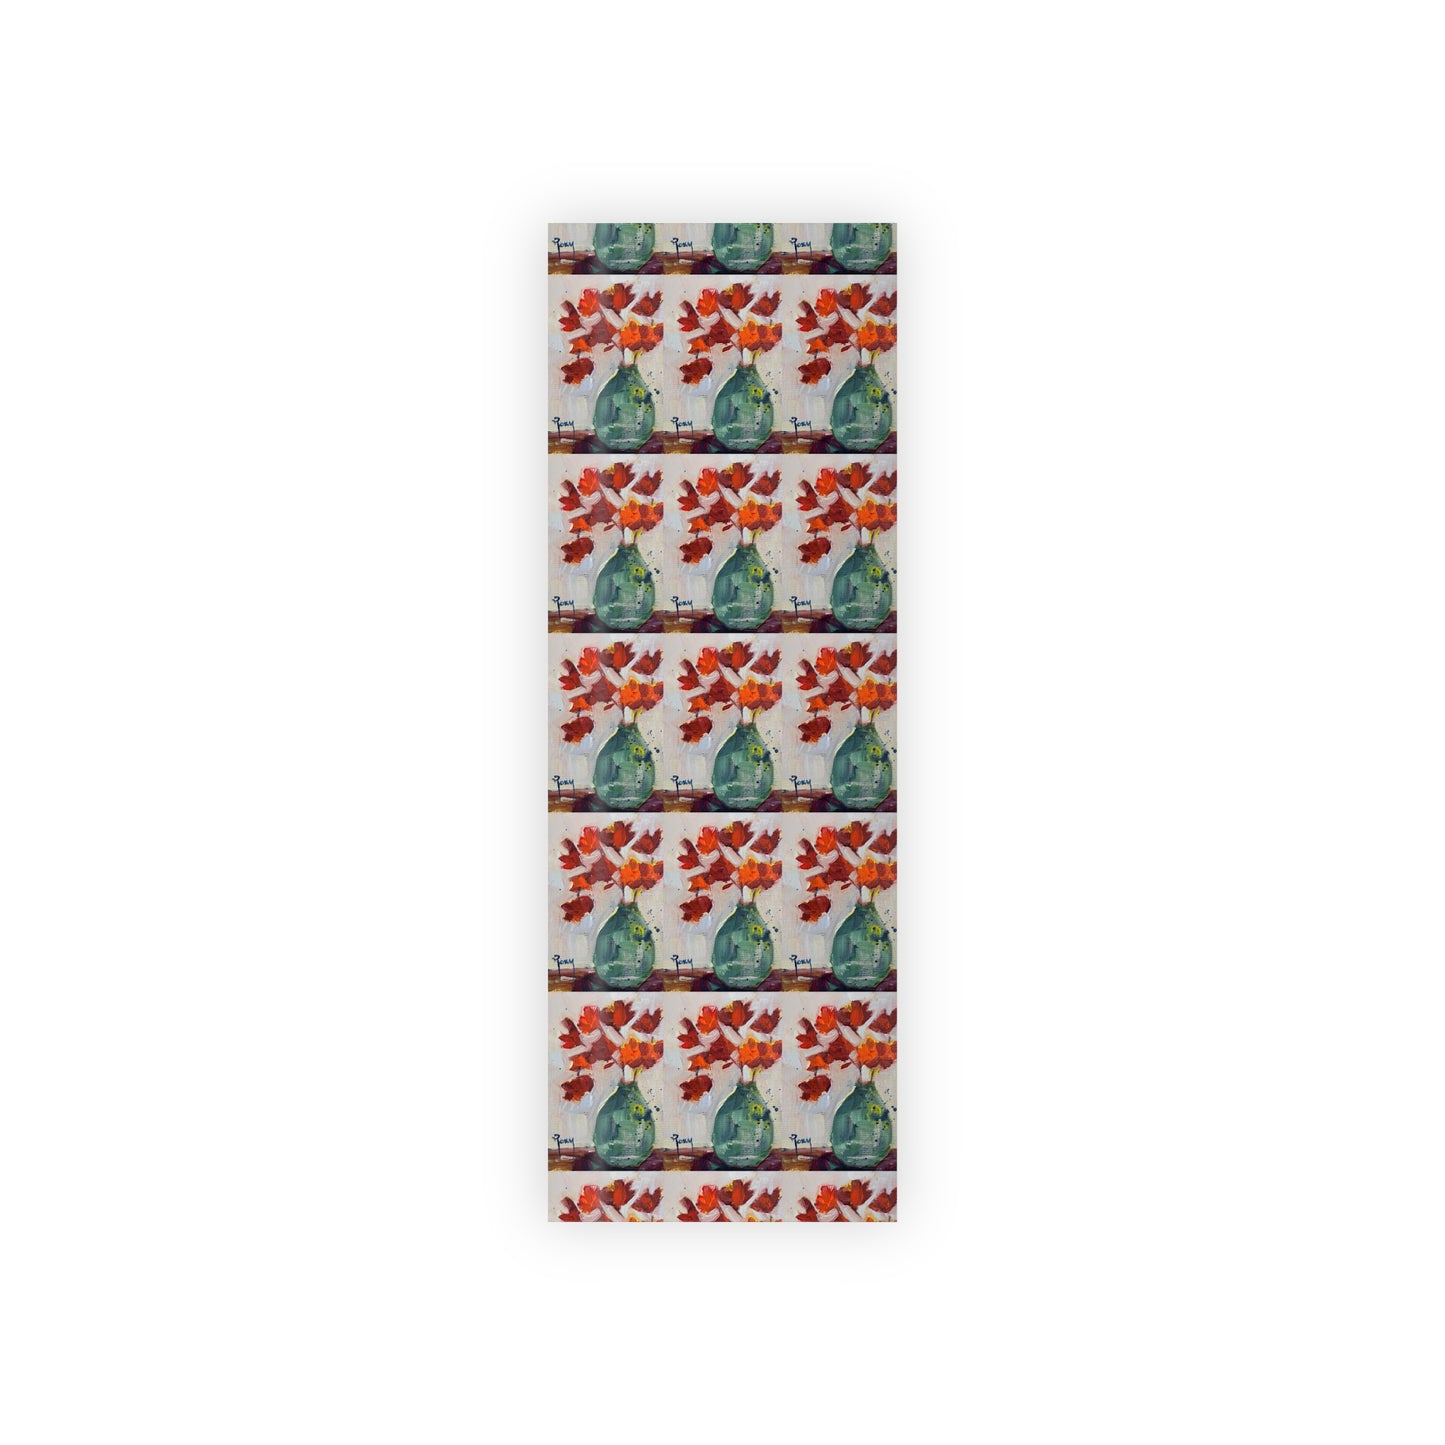 Autumn Leaves in a Teal Vase Gift Wrapping Paper  1pc